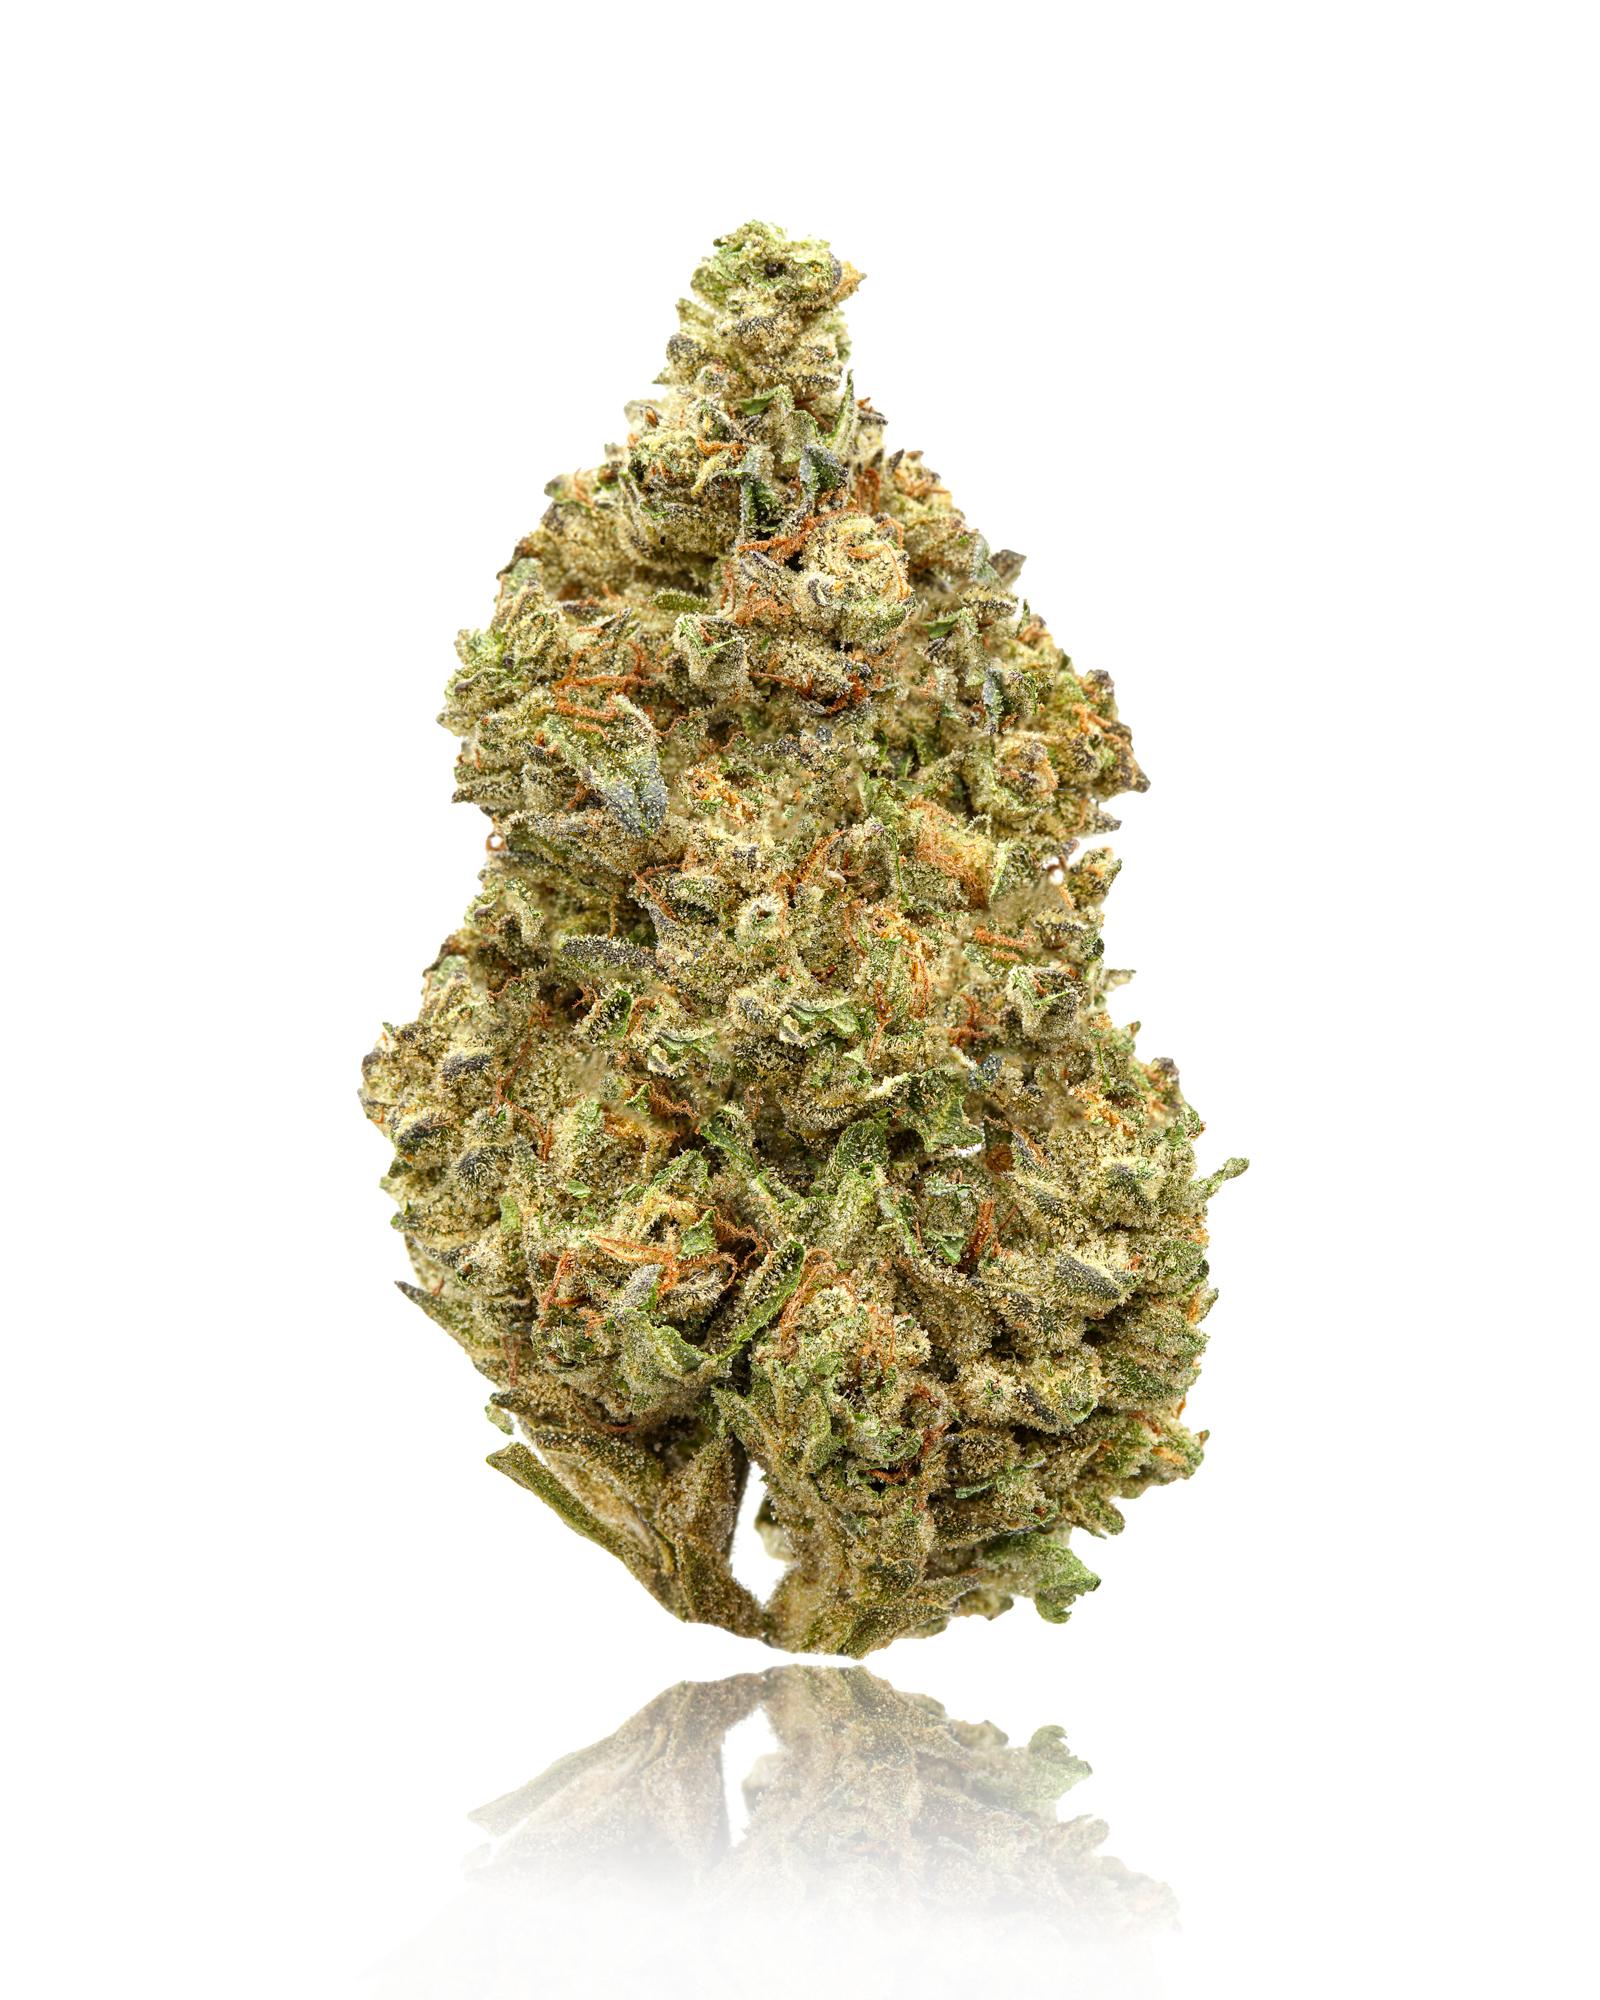 Cheap Peanut Butter Breath - Where to buy feminized cannabis strain seeds with free shipping